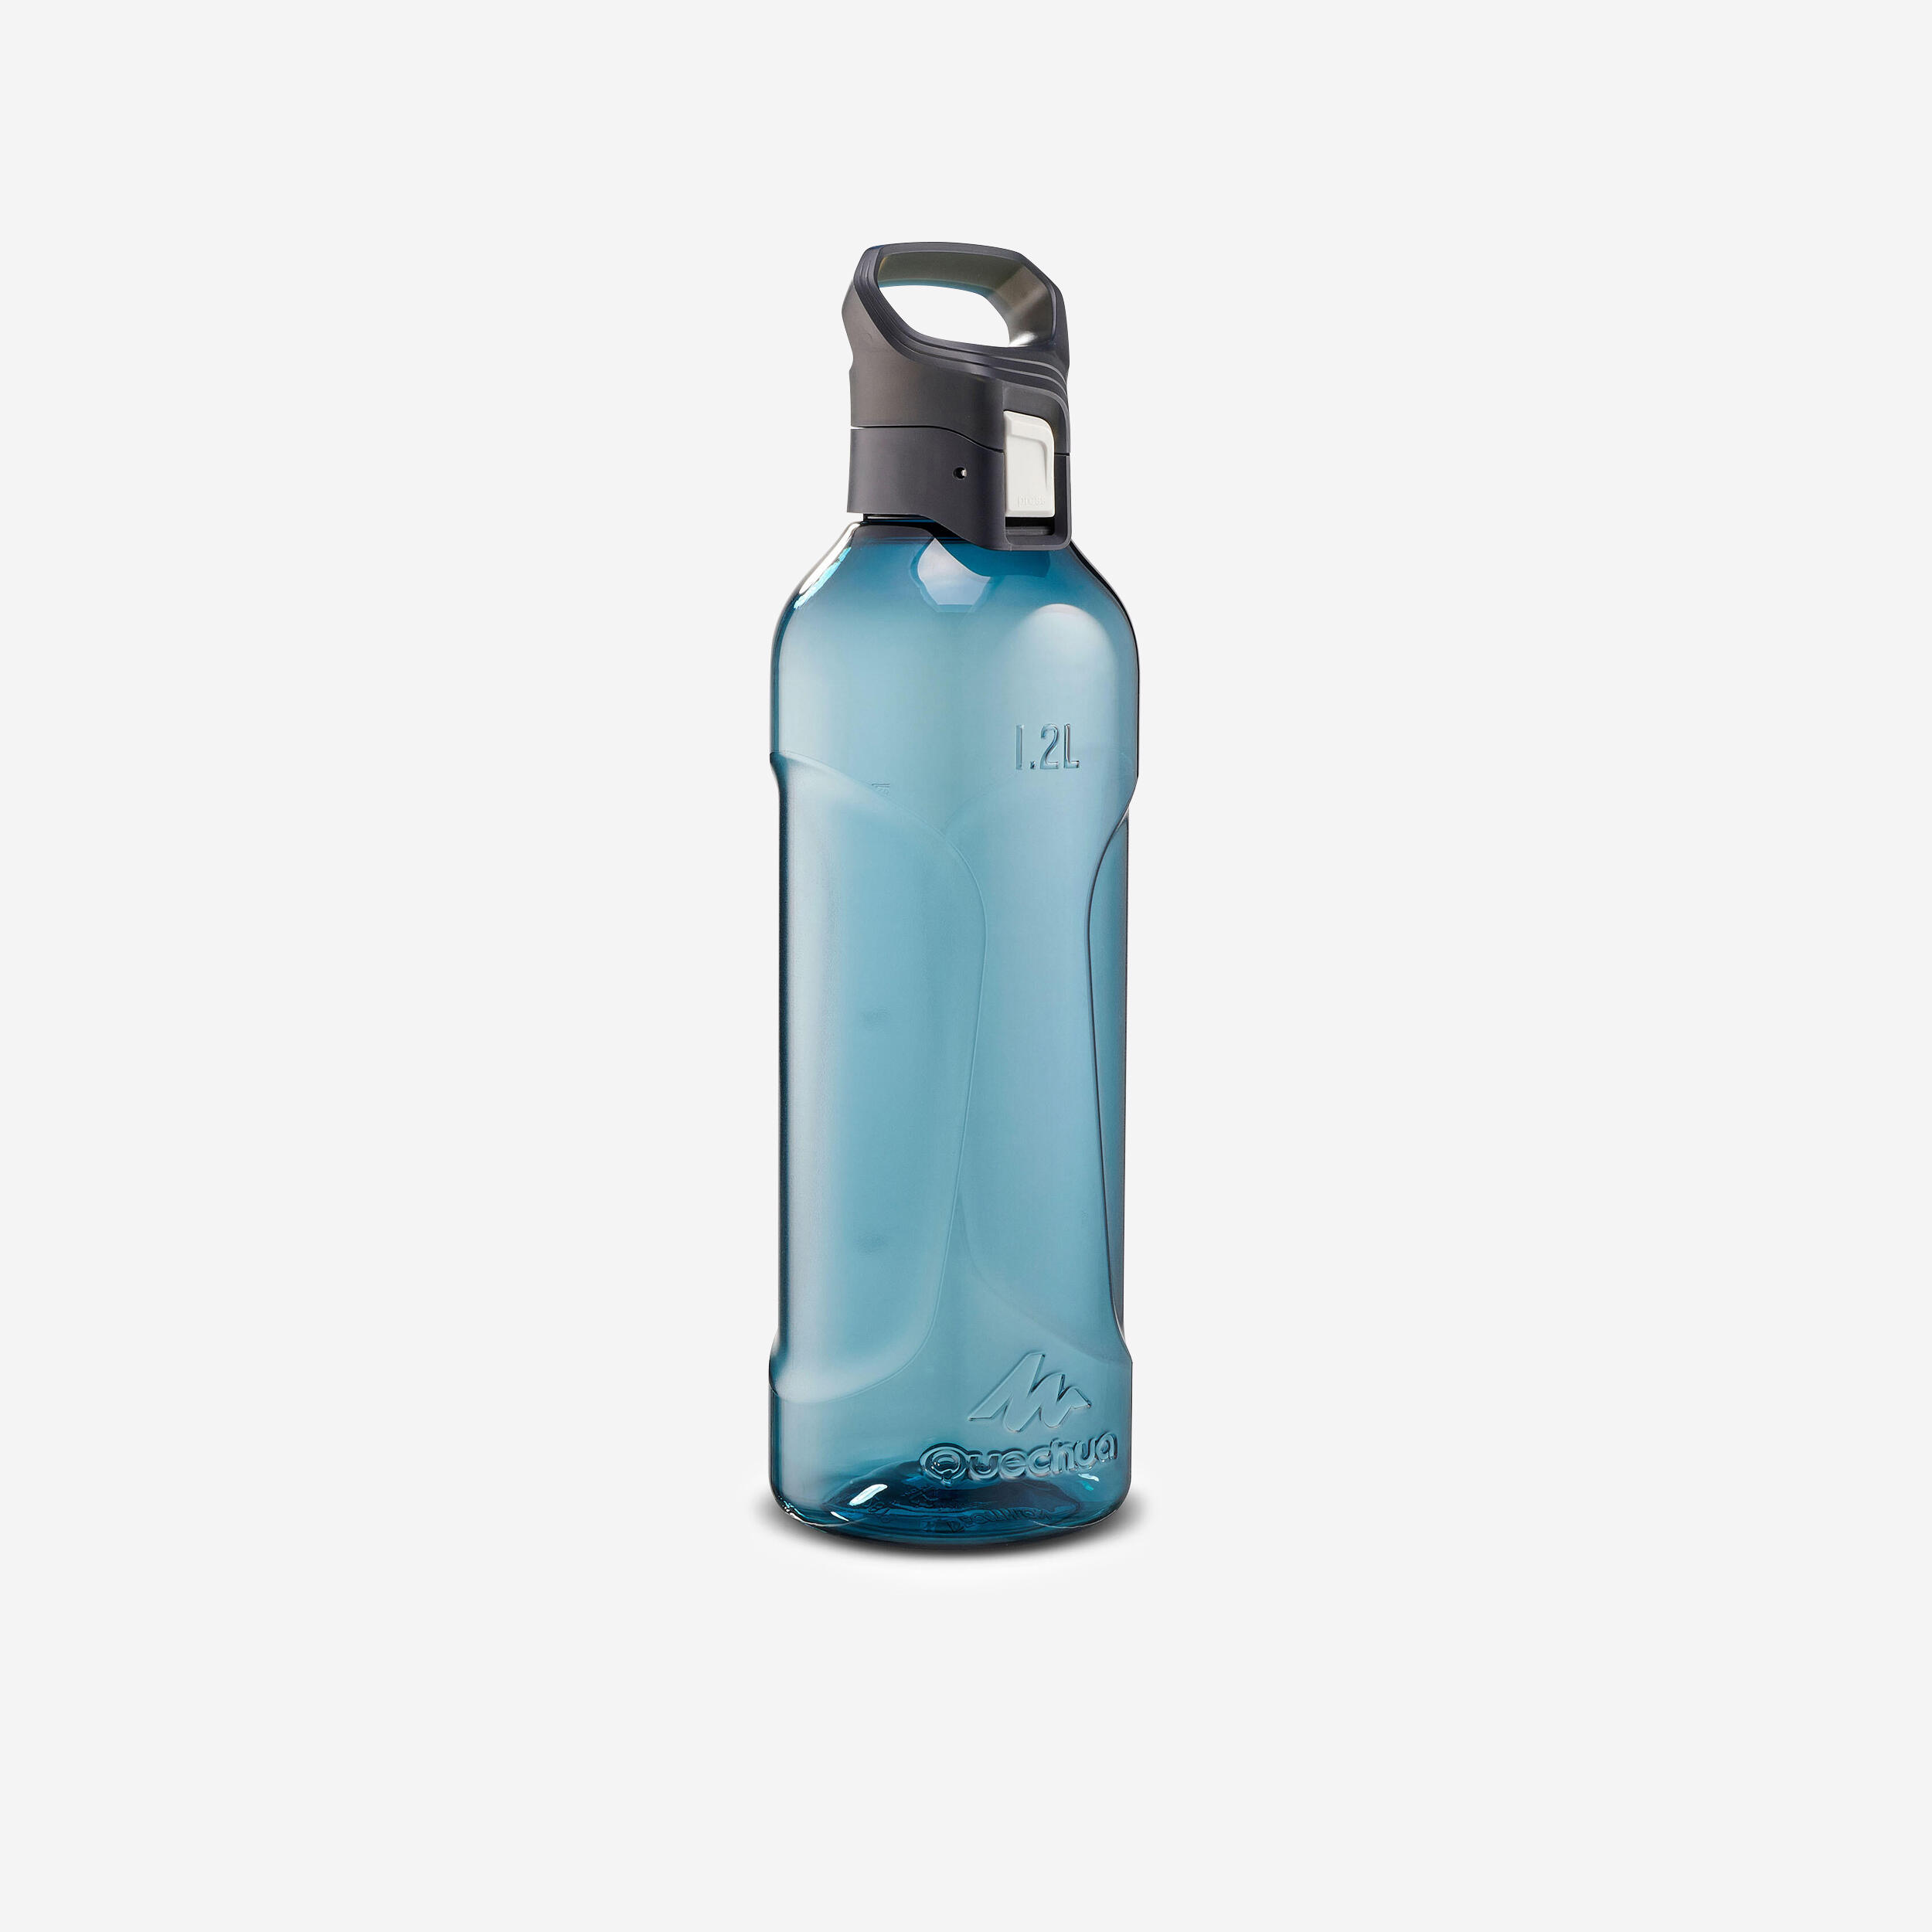 QUECHUA Ecozen® Flask 1.2 L with quick opening cap for hiking